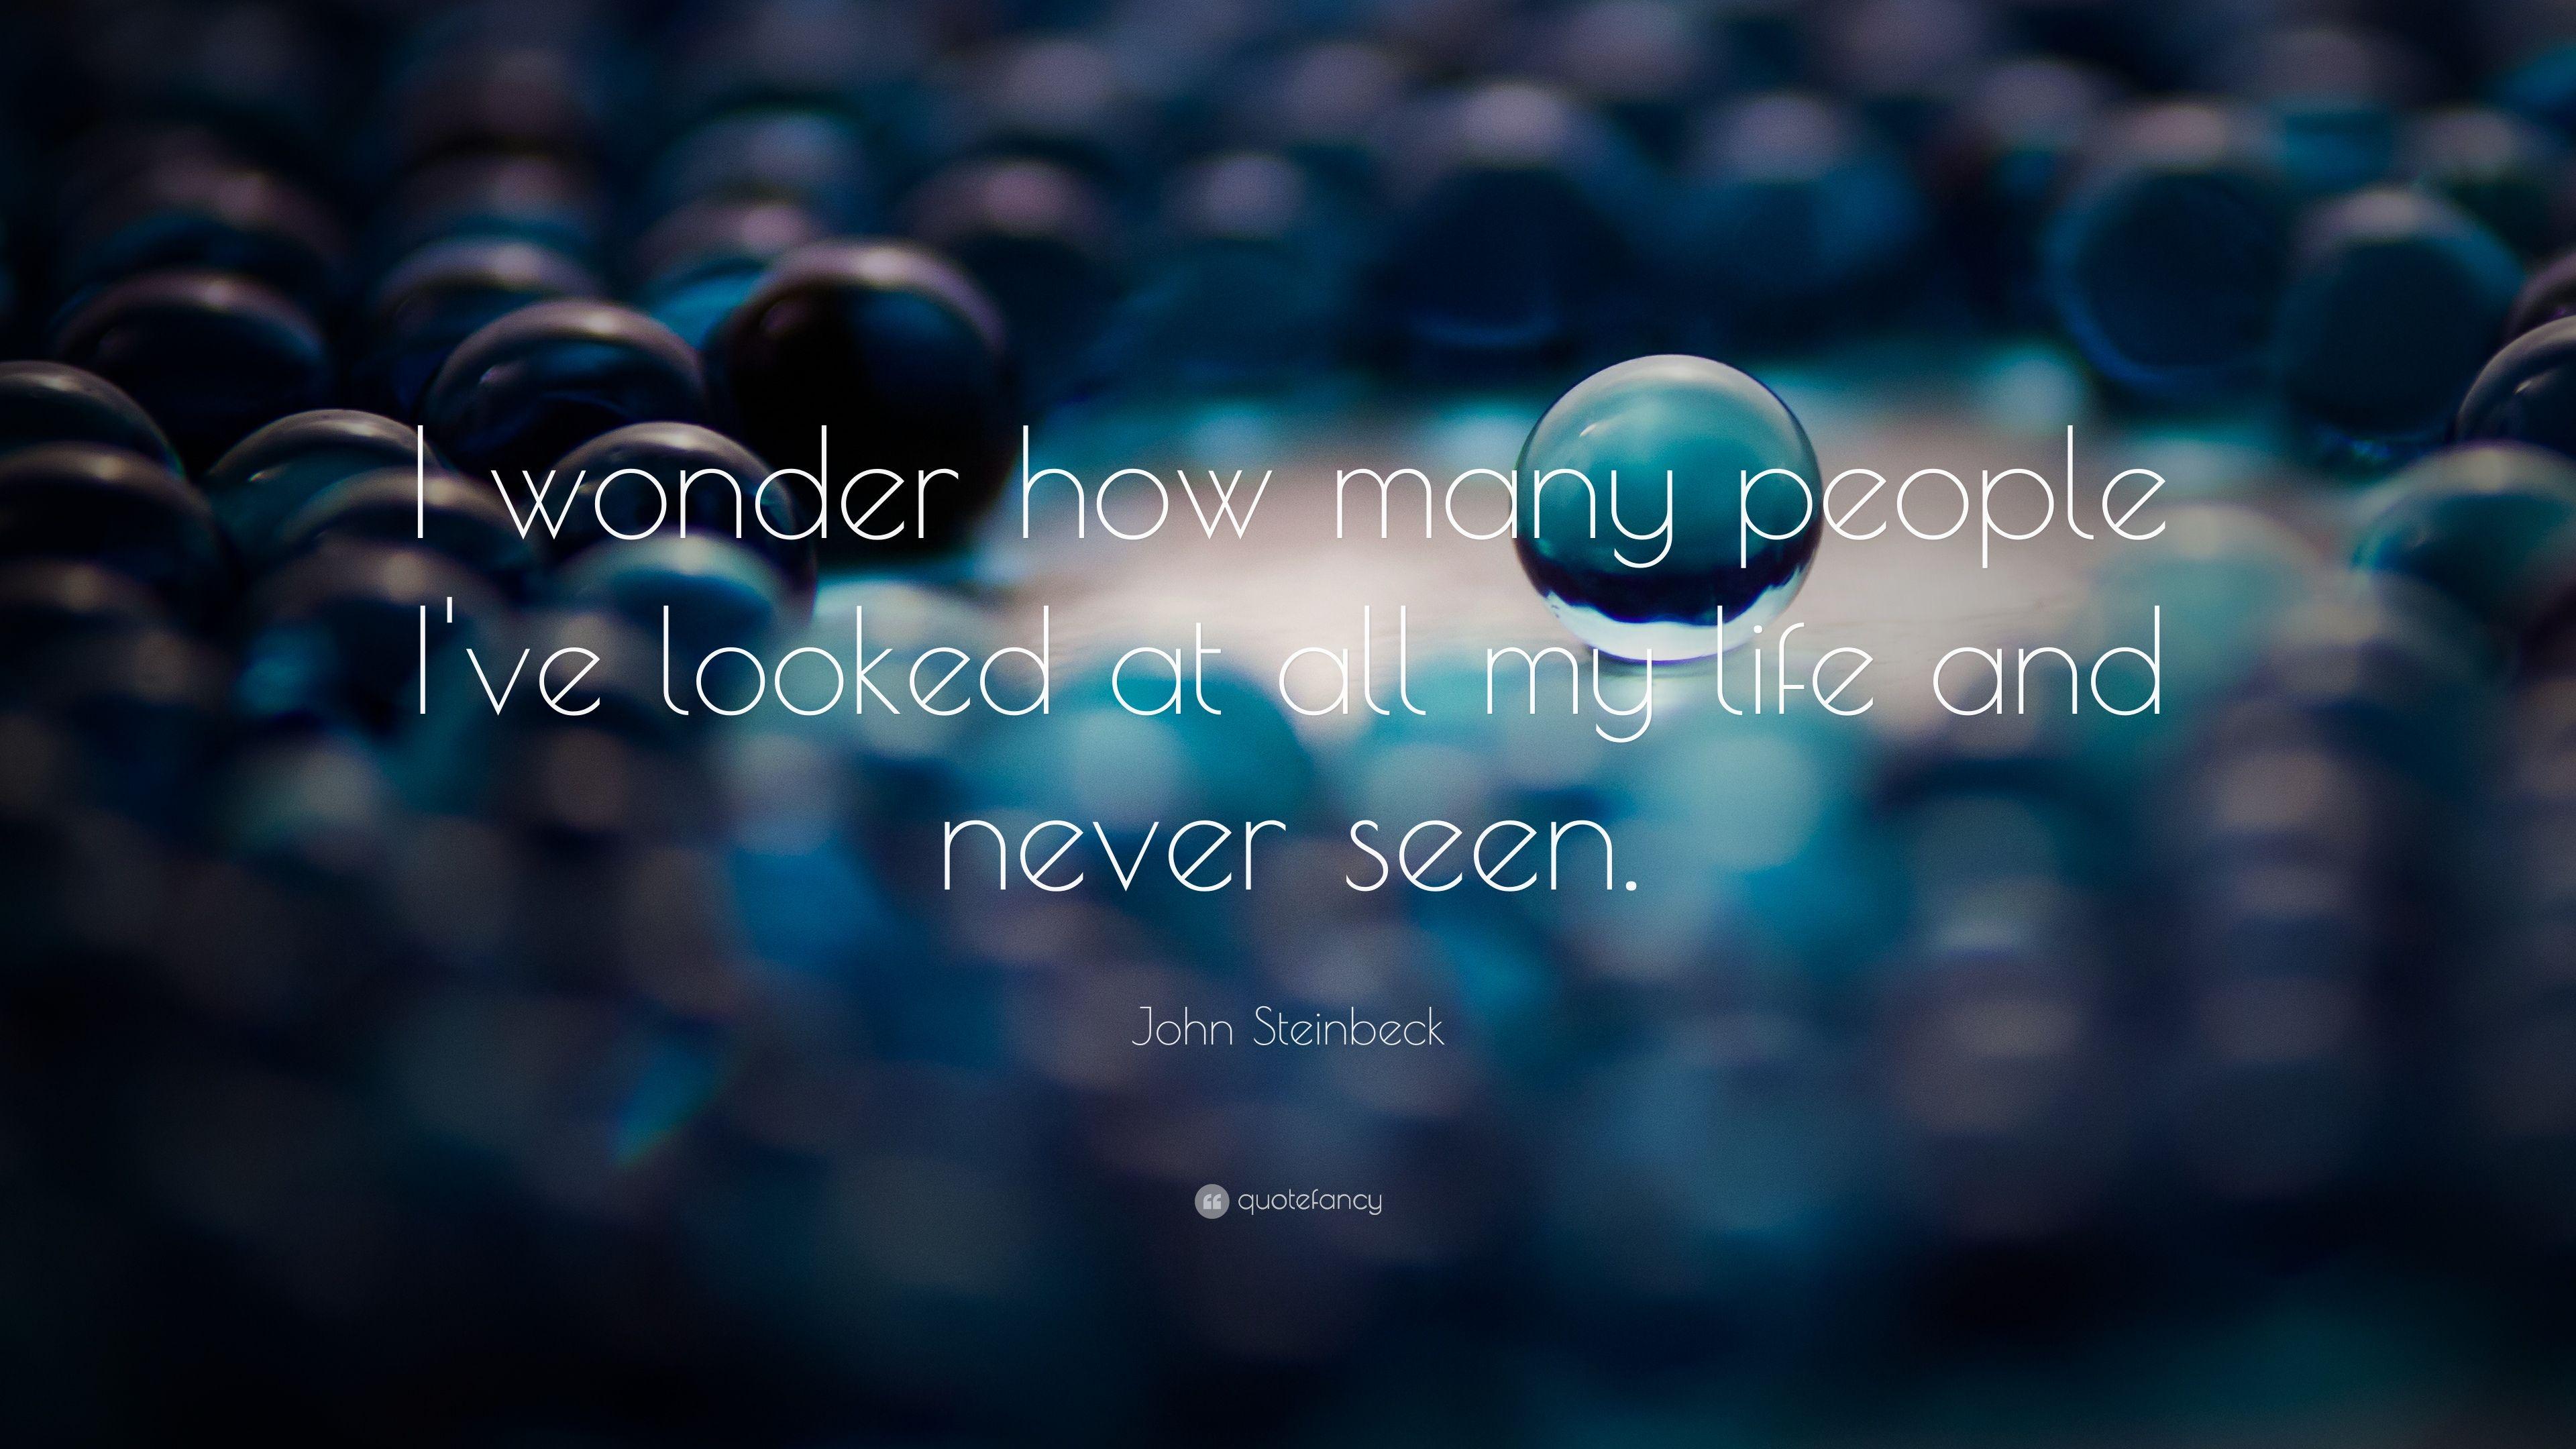 John Steinbeck Quote: “I wonder how many people I've looked at all